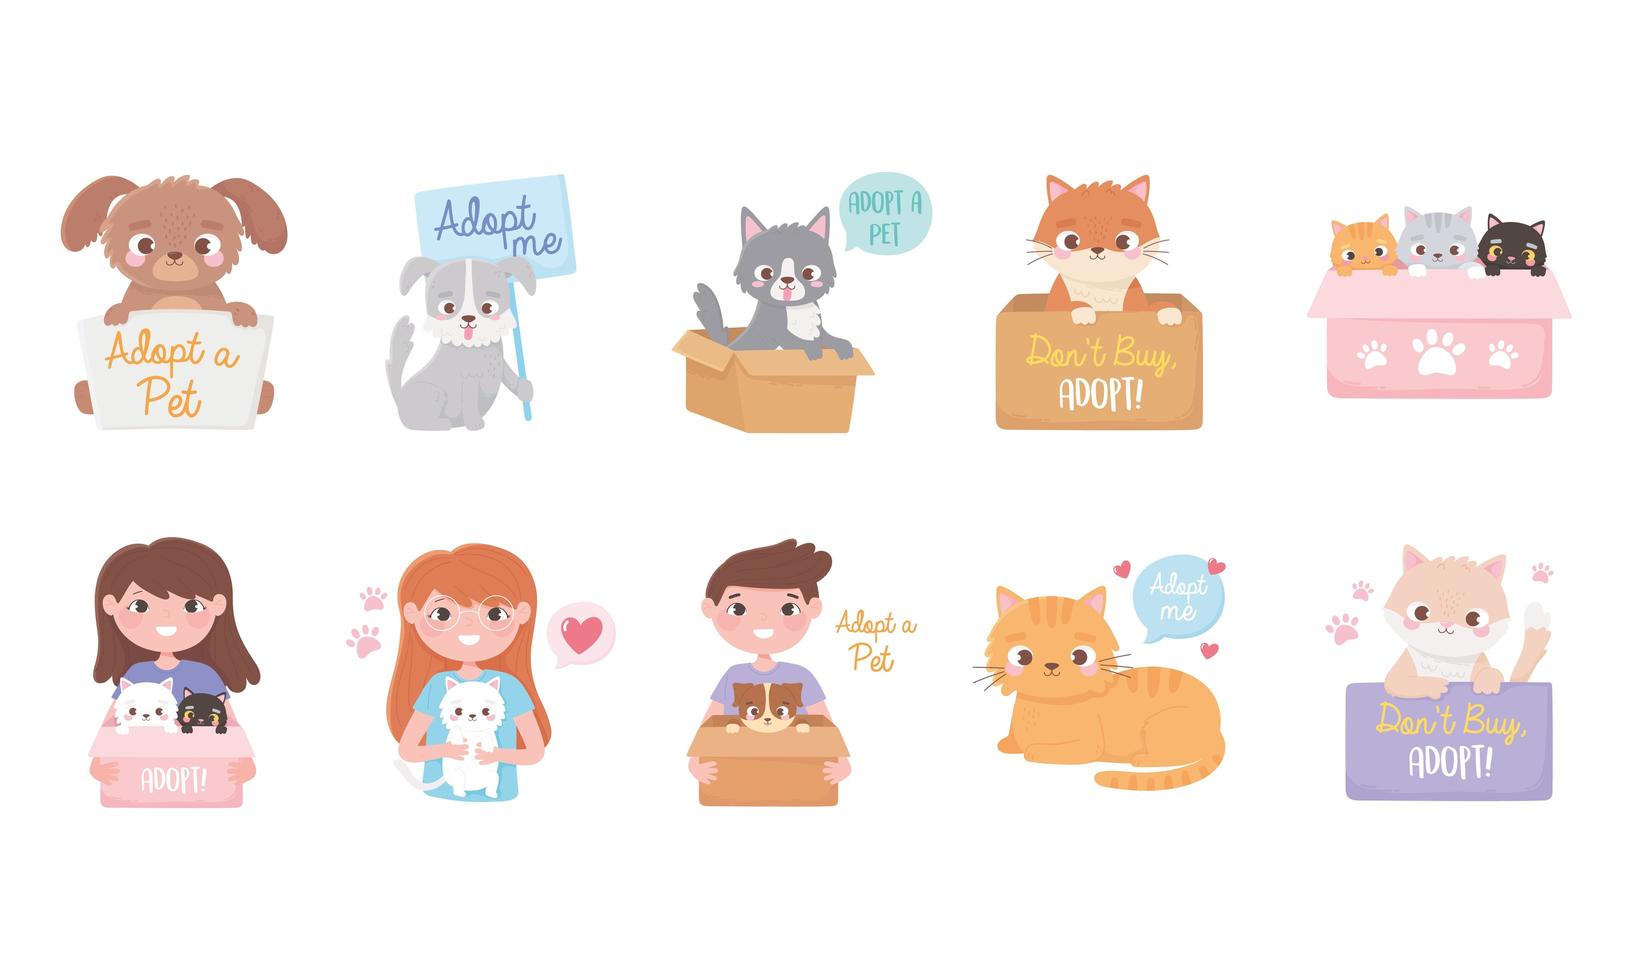 adopt a pet, icons set of people with cats and dogs cartoon vector